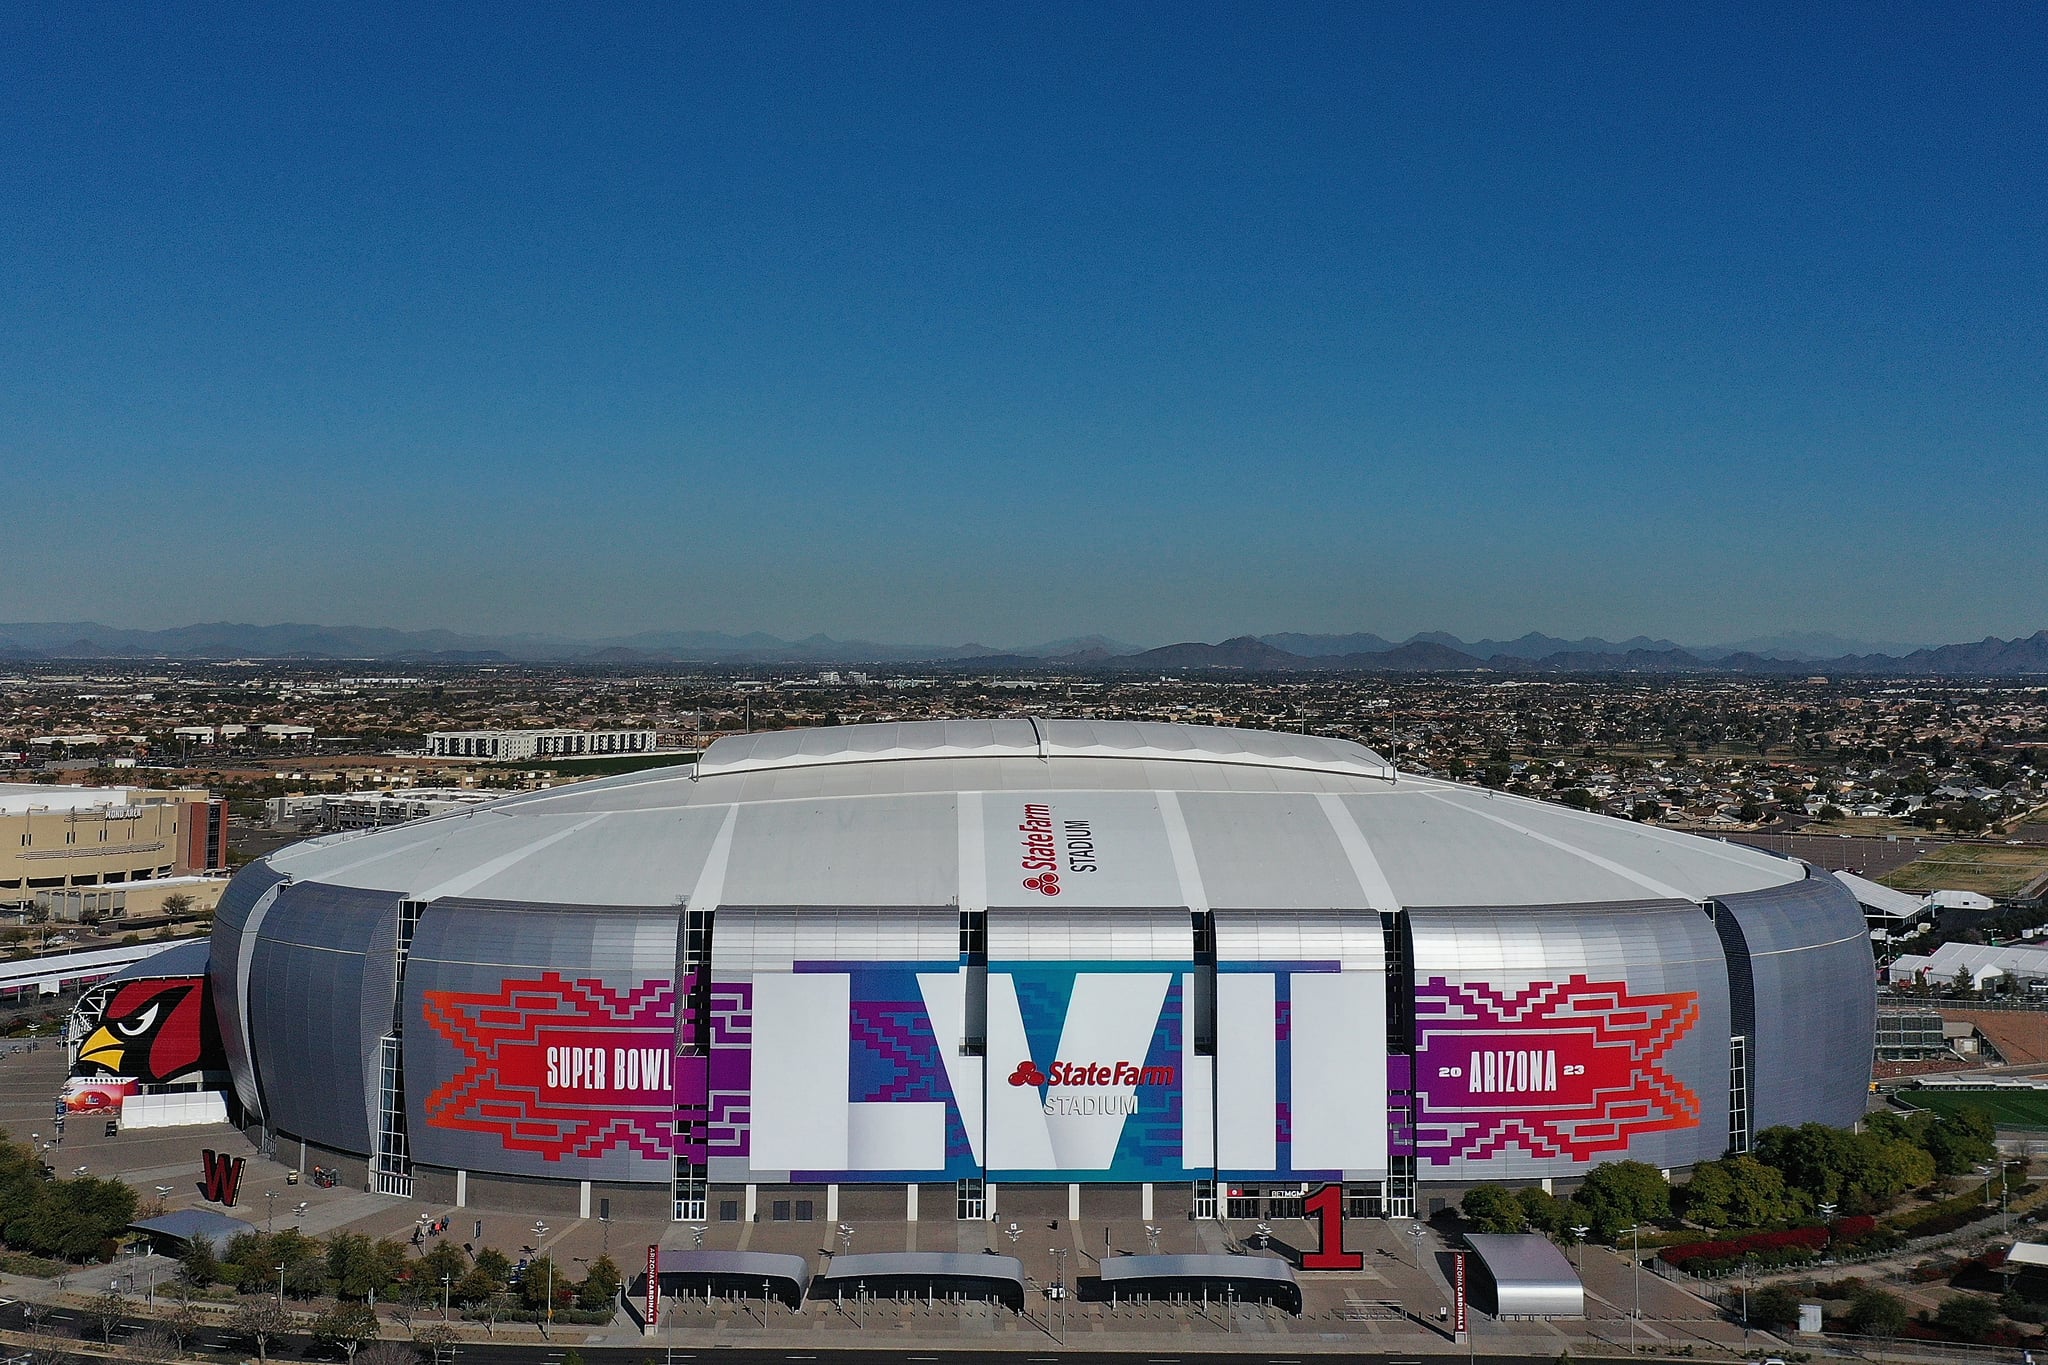 GLENDALE, ARIZONA - JANUARY 28: In an aerial view of State Farm Stadium on January 28, 2023 in Glendale, Arizona.  State Farm Stadium will host the NFL Super Bowl LVII on February 12.  (Photo by Christian Petersen/Getty Images)